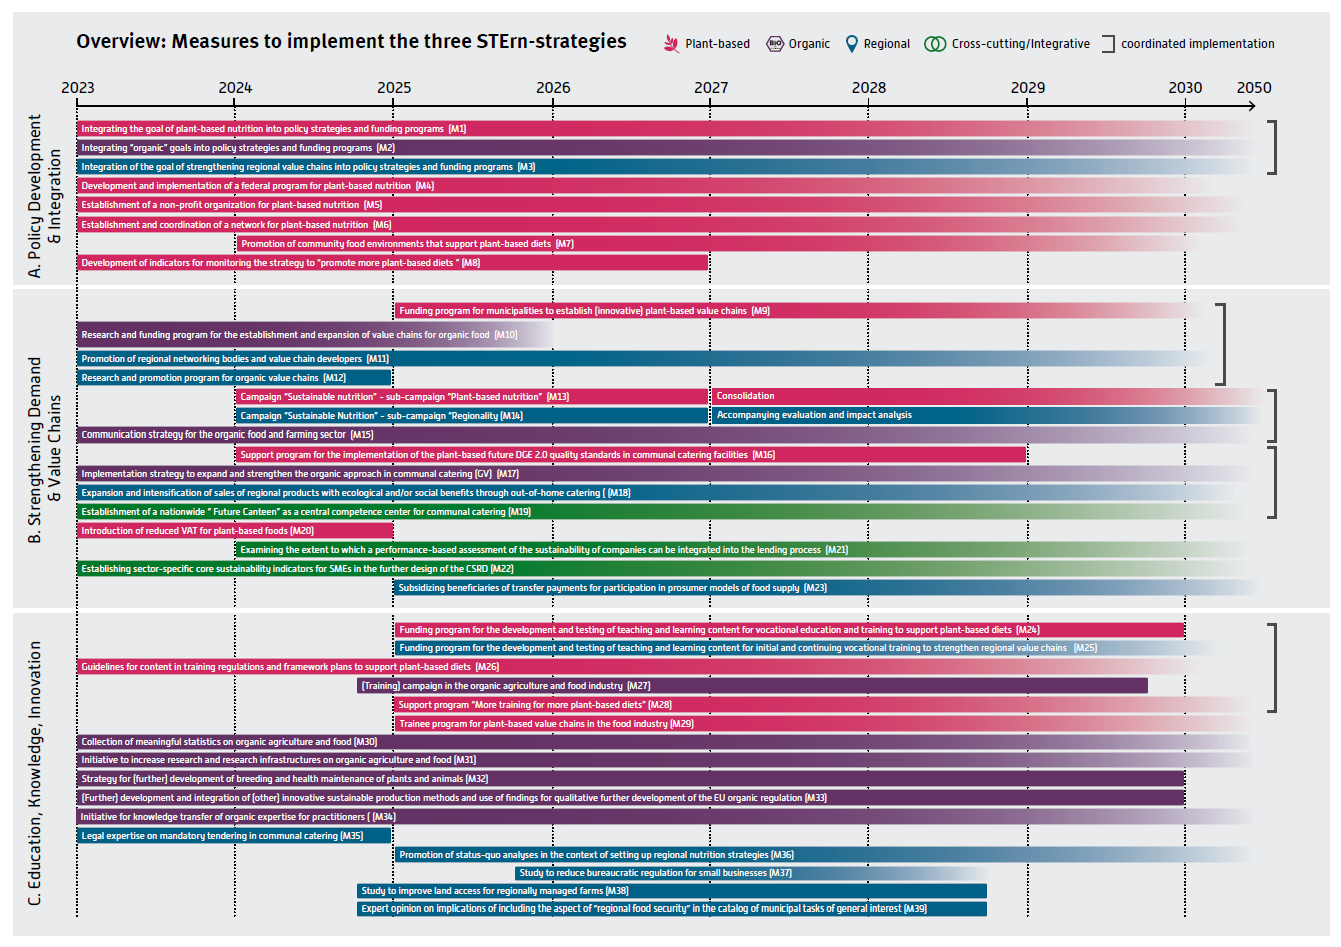 Informative timeline graphic with overlapping horizontal bars in various shades of red, blue, green, and purple, signifying different initiatives mapped out from 2023 to 2050. The title at the top of the graphic saying 'Überblick: Maßnahmen zur Umsetzung der drei STERN-Strategien' in bold, and a legend explaining the color scheme, such as 'plant-based', 'organic', 'regional', 'comprehensive/integrated', and 'targeted implementation.'